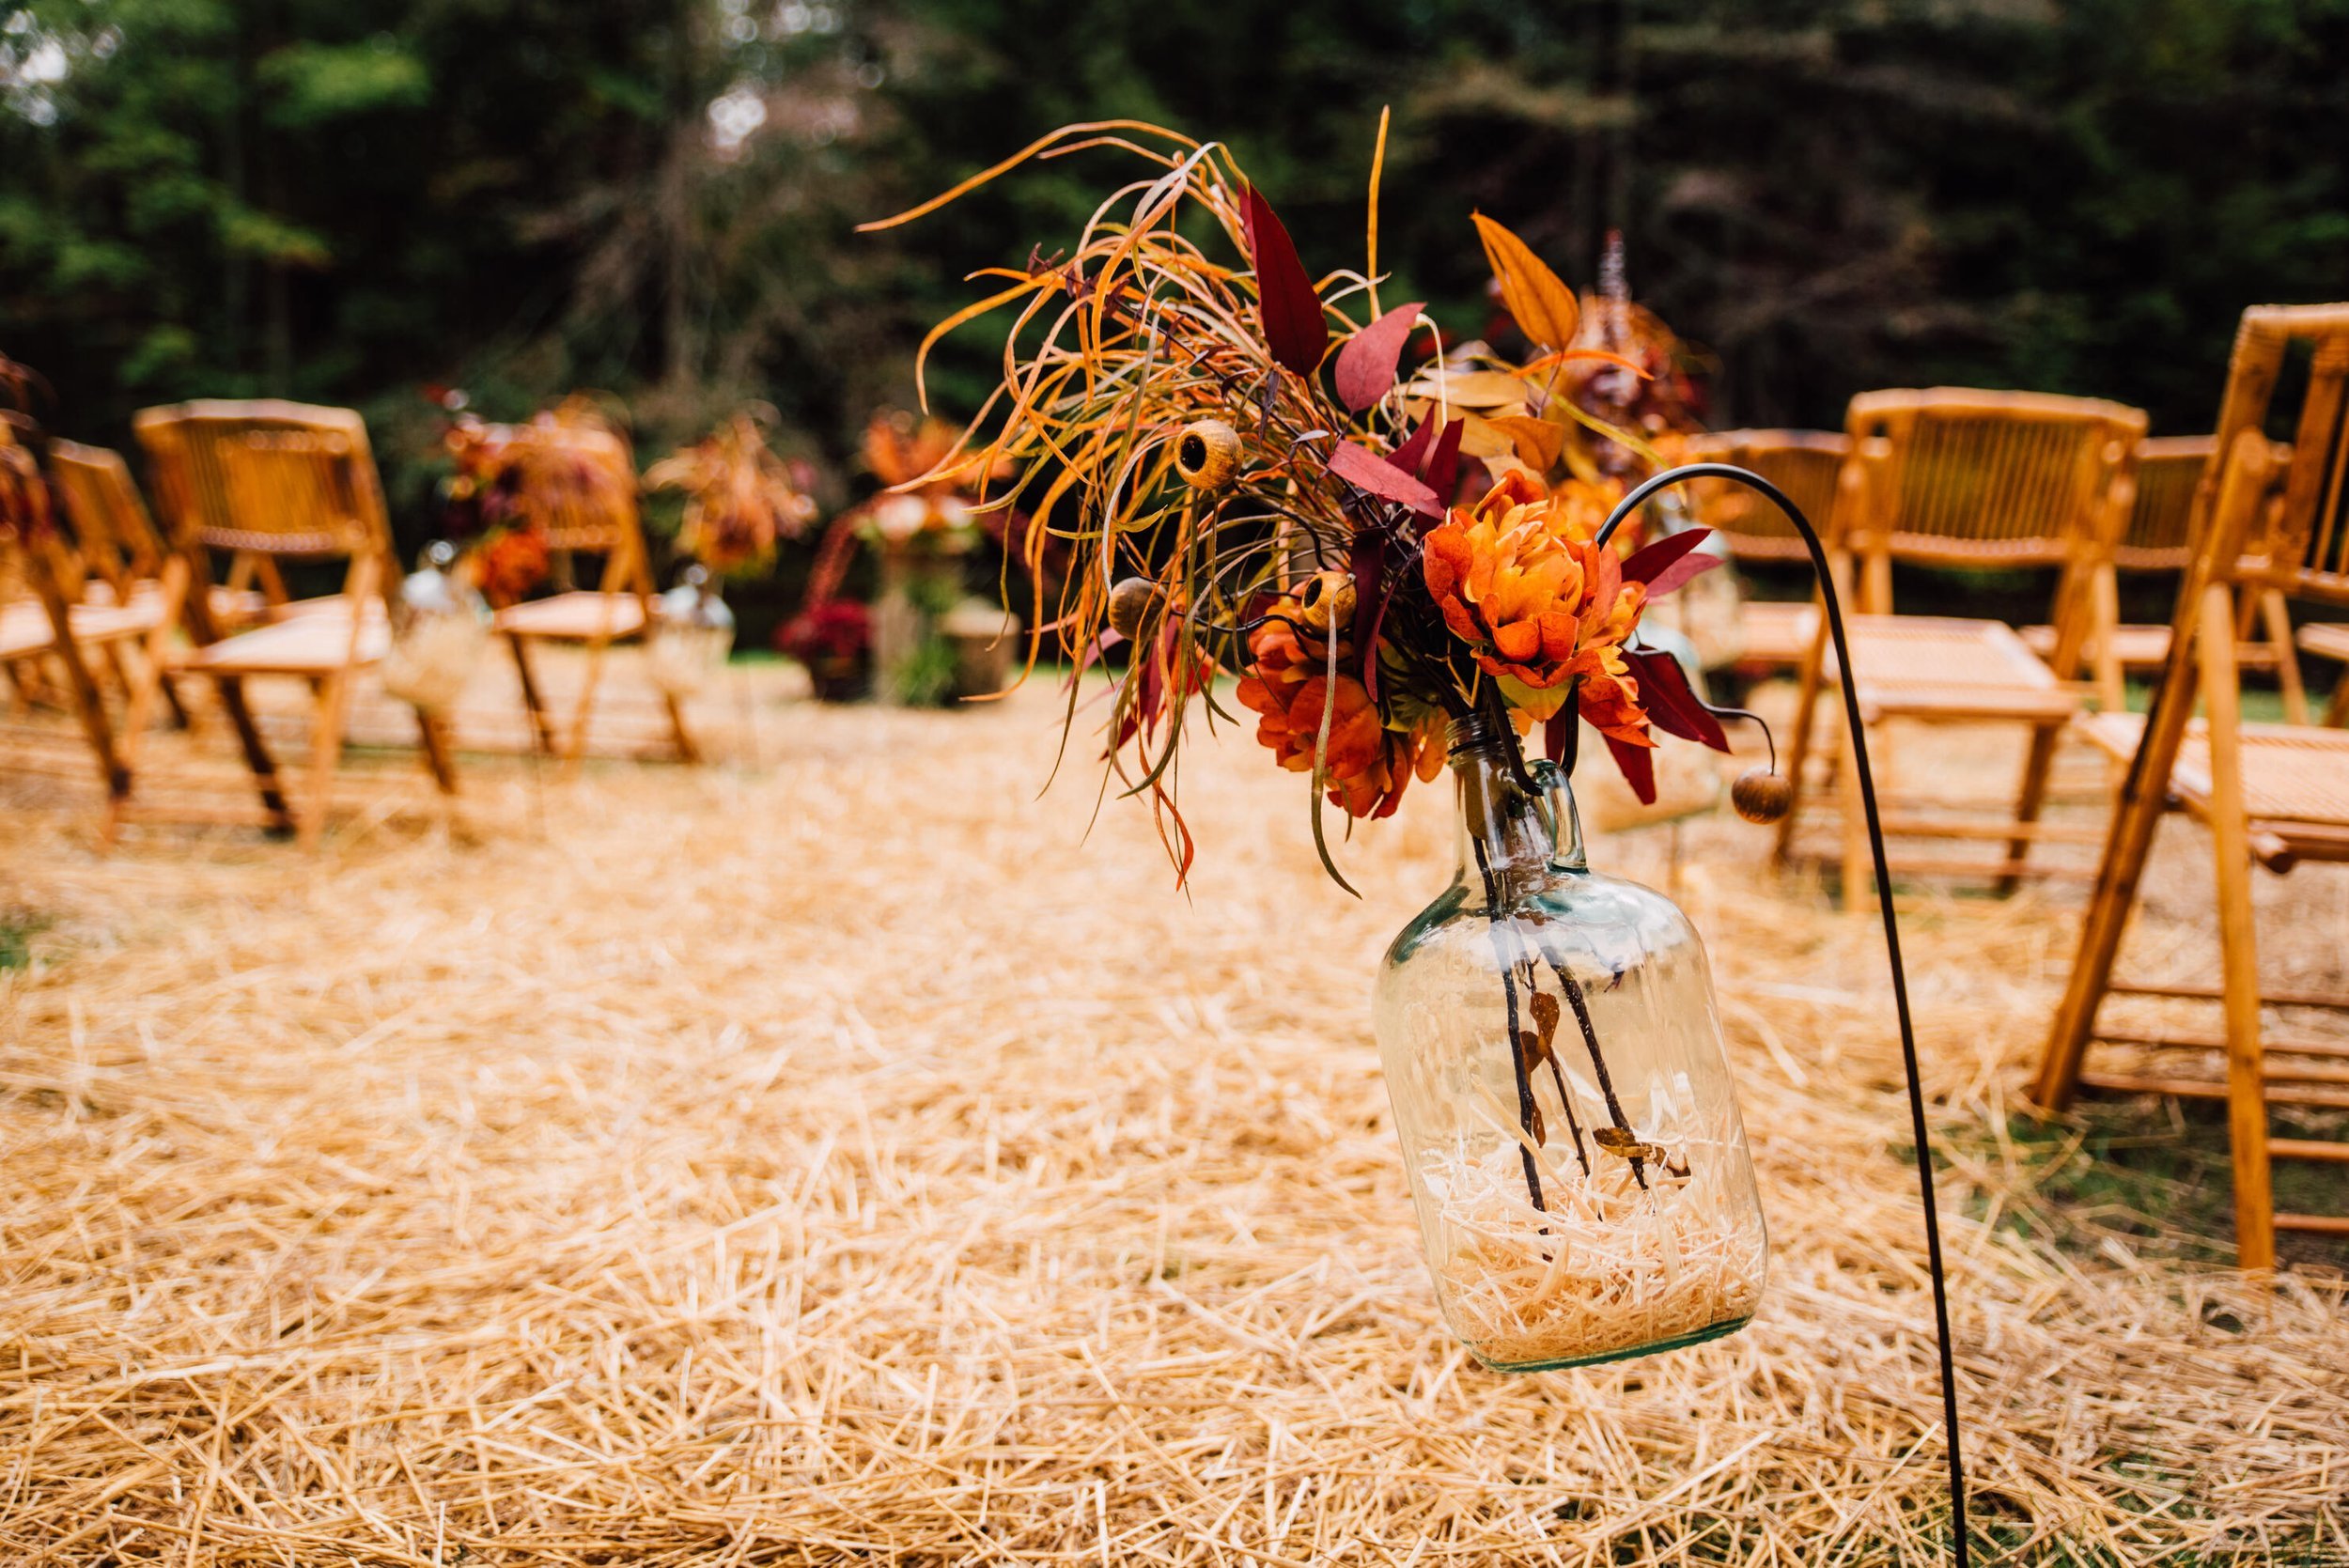  A dried bouquet hangs from a metal hanger&nbsp;at an outdoor wedding ceremony 